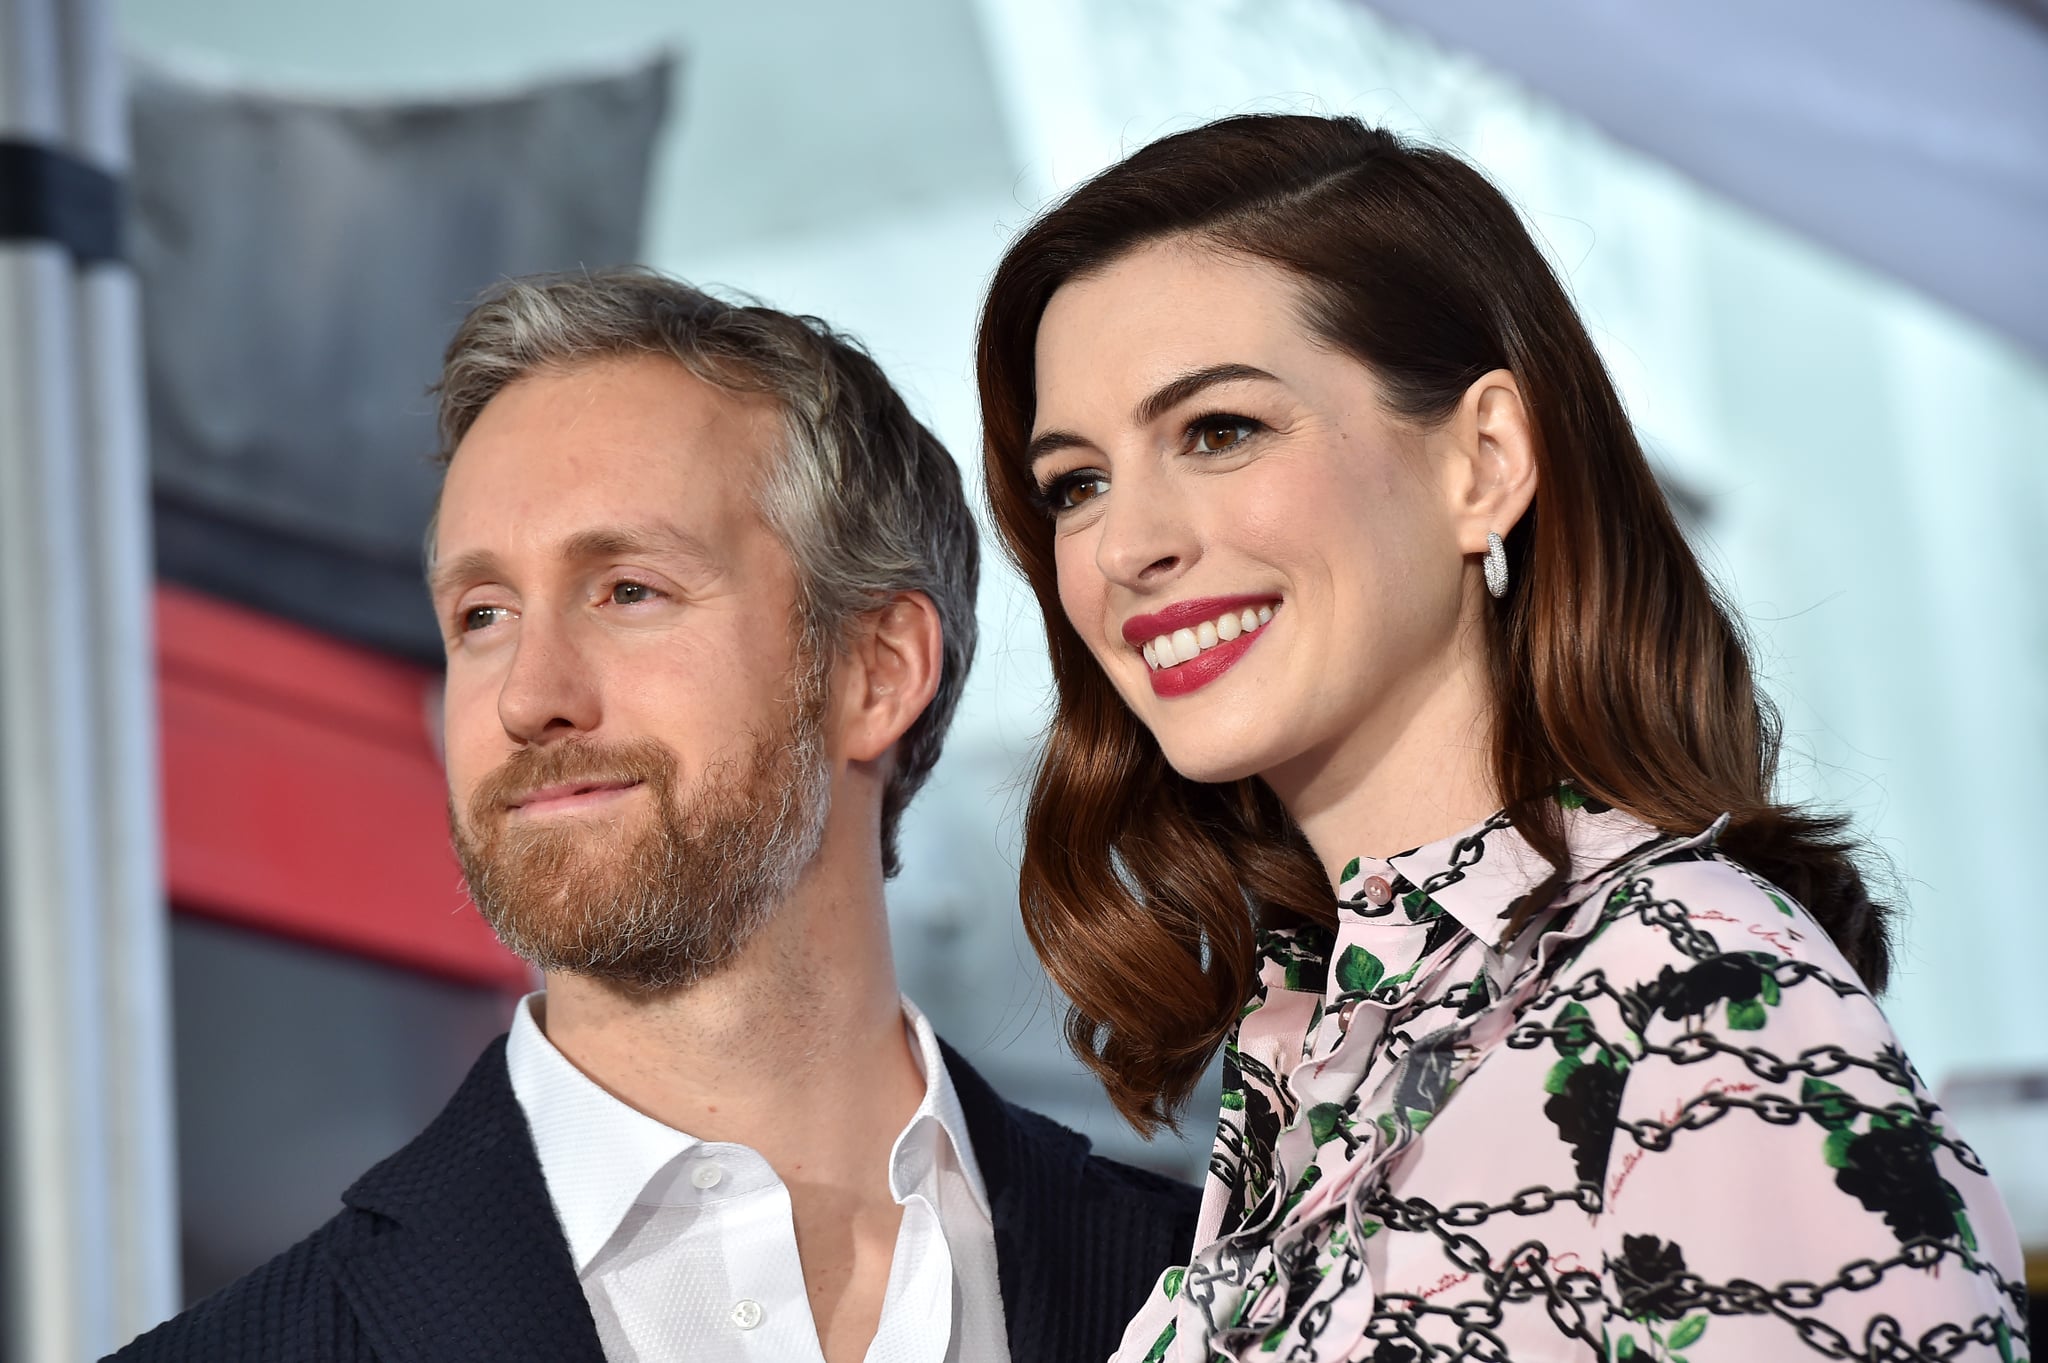 HOLLYWOOD, CALIFORNIA - MAY 09: Anne Hathaway and Adam Shulman attend the ceremony honoring Anne Hathaway with star on the Hollywood Walk of Fame on May 09, 2019 in Hollywood, California. (Photo by Axelle/Bauer-Griffin/FilmMagic)